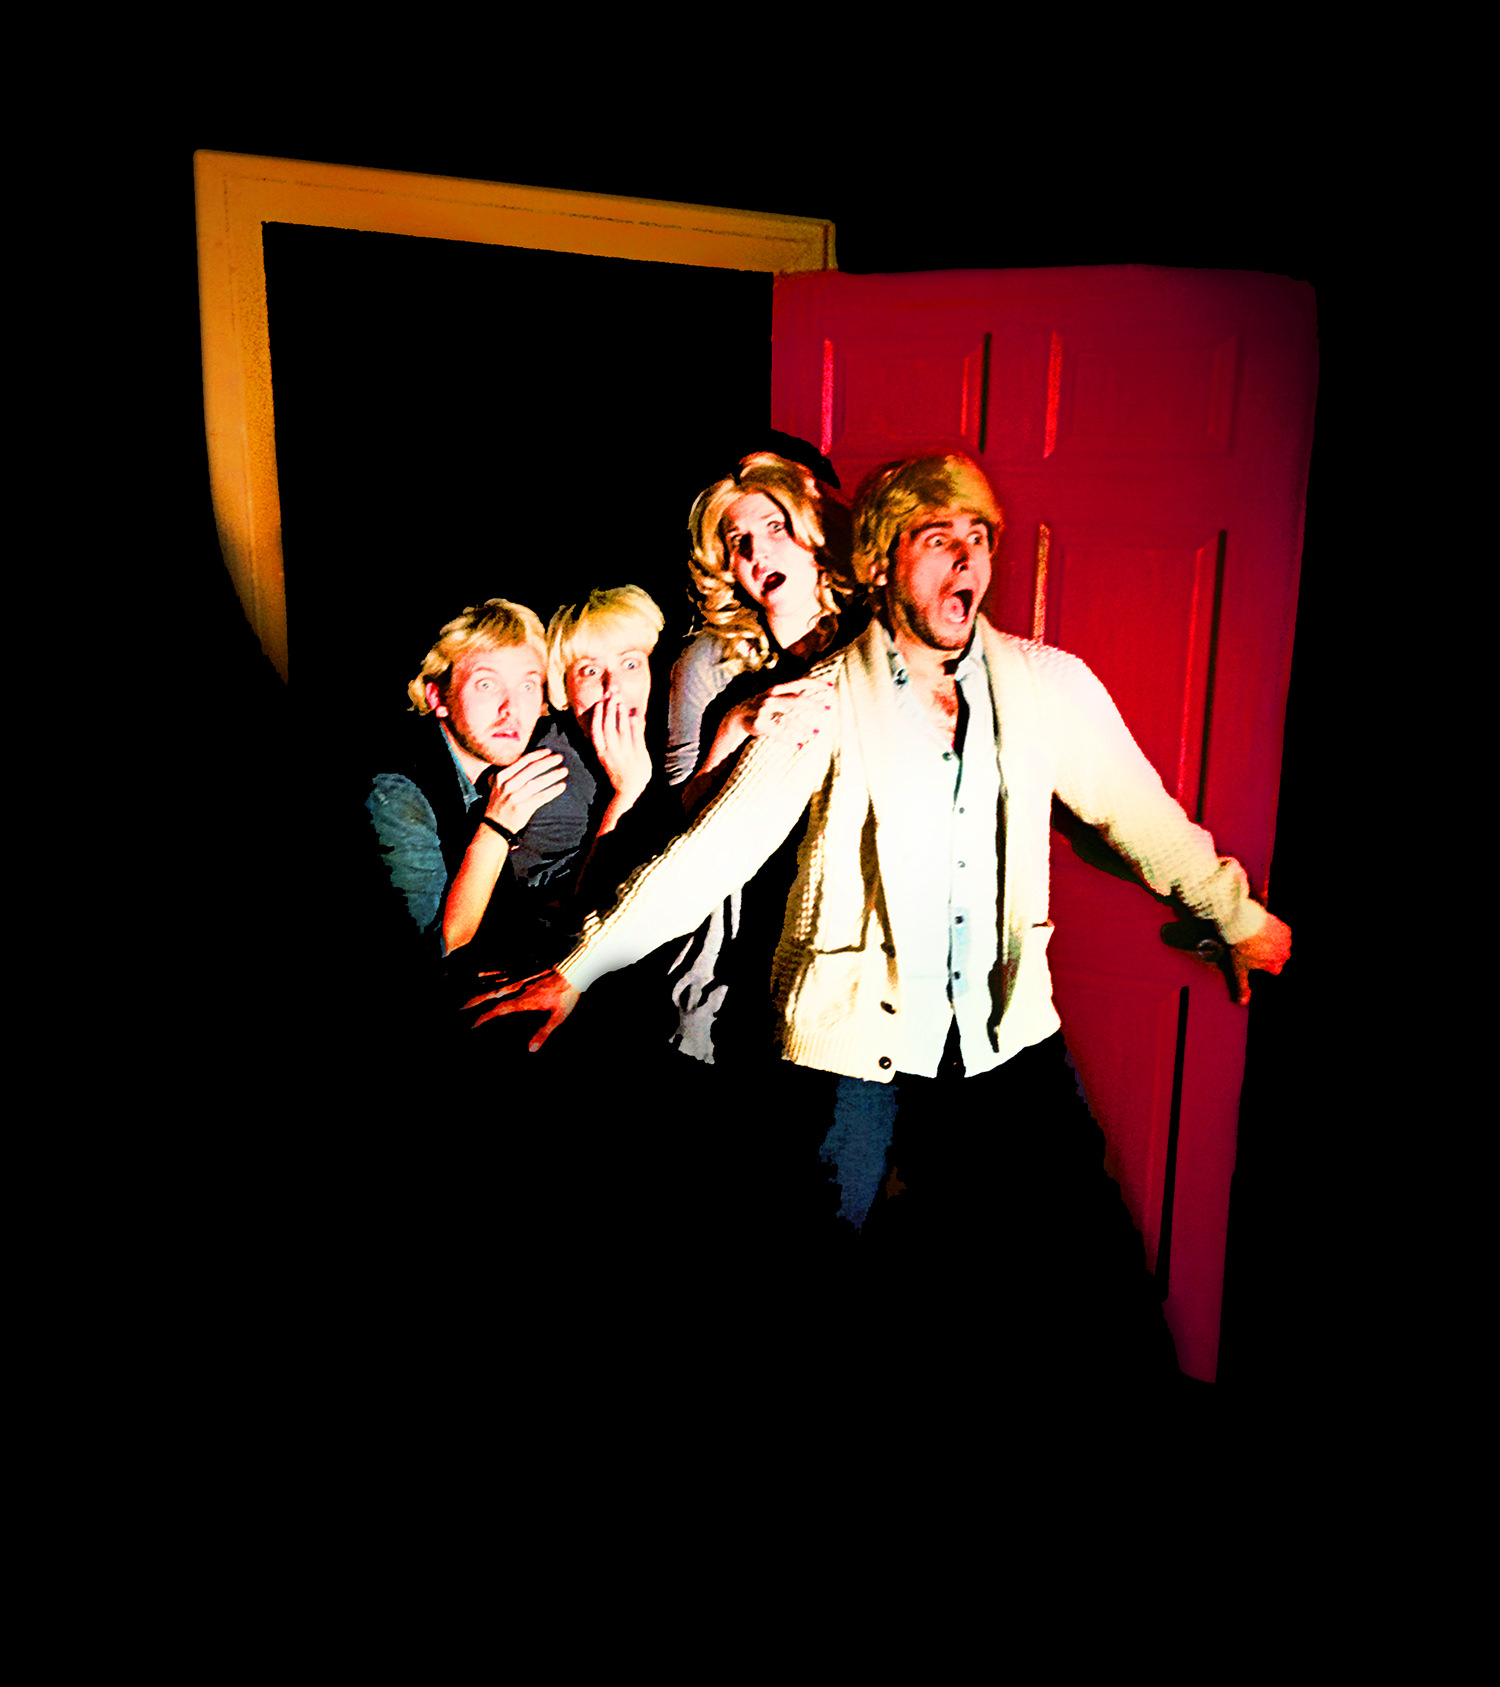 What horrors await the children (l to r, Matthew Arrington, Suzan M. Jacokes, Julie Spittle, Vince Kelley) in the attic? Find out in the hilarious parody, Flowers Up Her Attic, playing at Ferndale's Ringwald Theatre from October 13-29, 2012. Photo by Joe Plambeck. 1